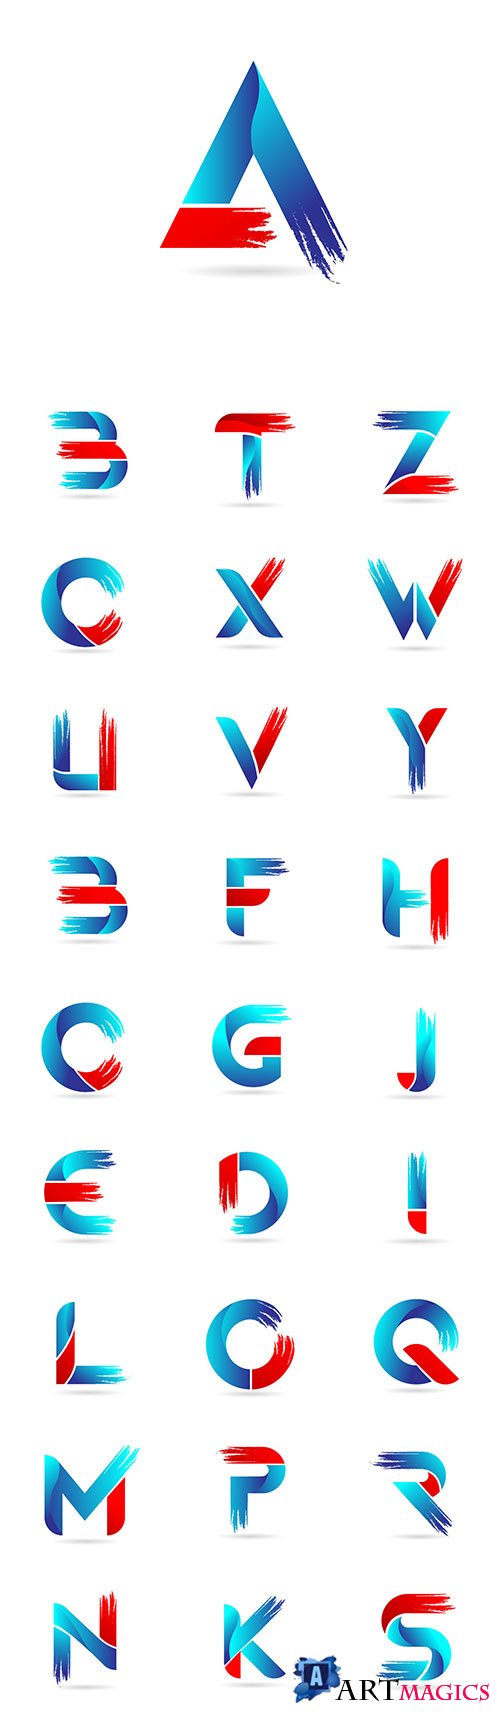 Blue red alphabet letter with grunge brush pattern for company logo icon